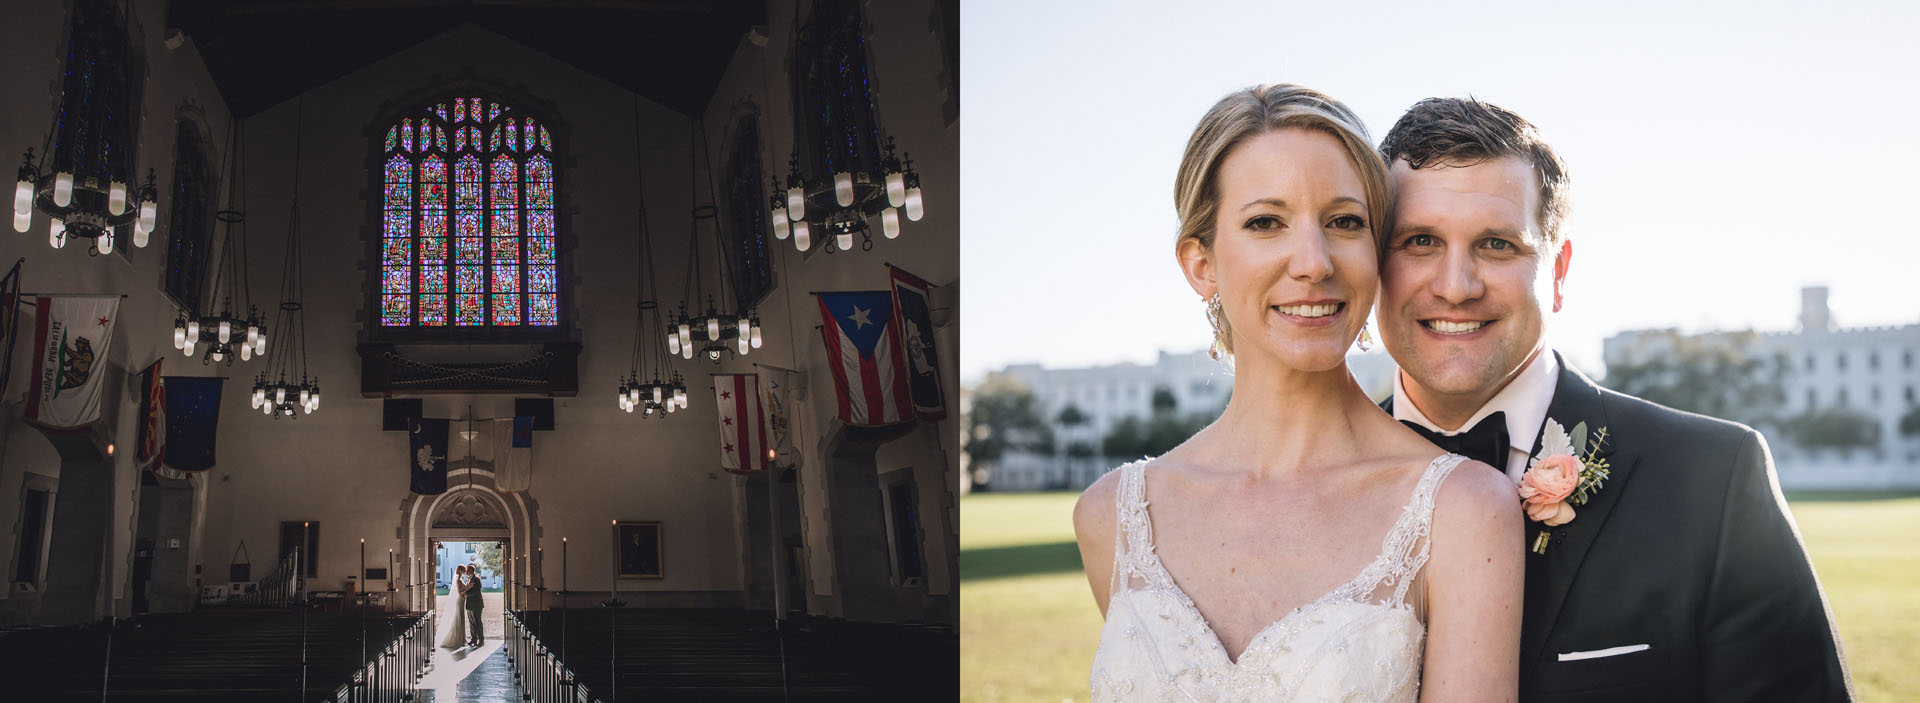 Wedding photography at Summerall Chapel